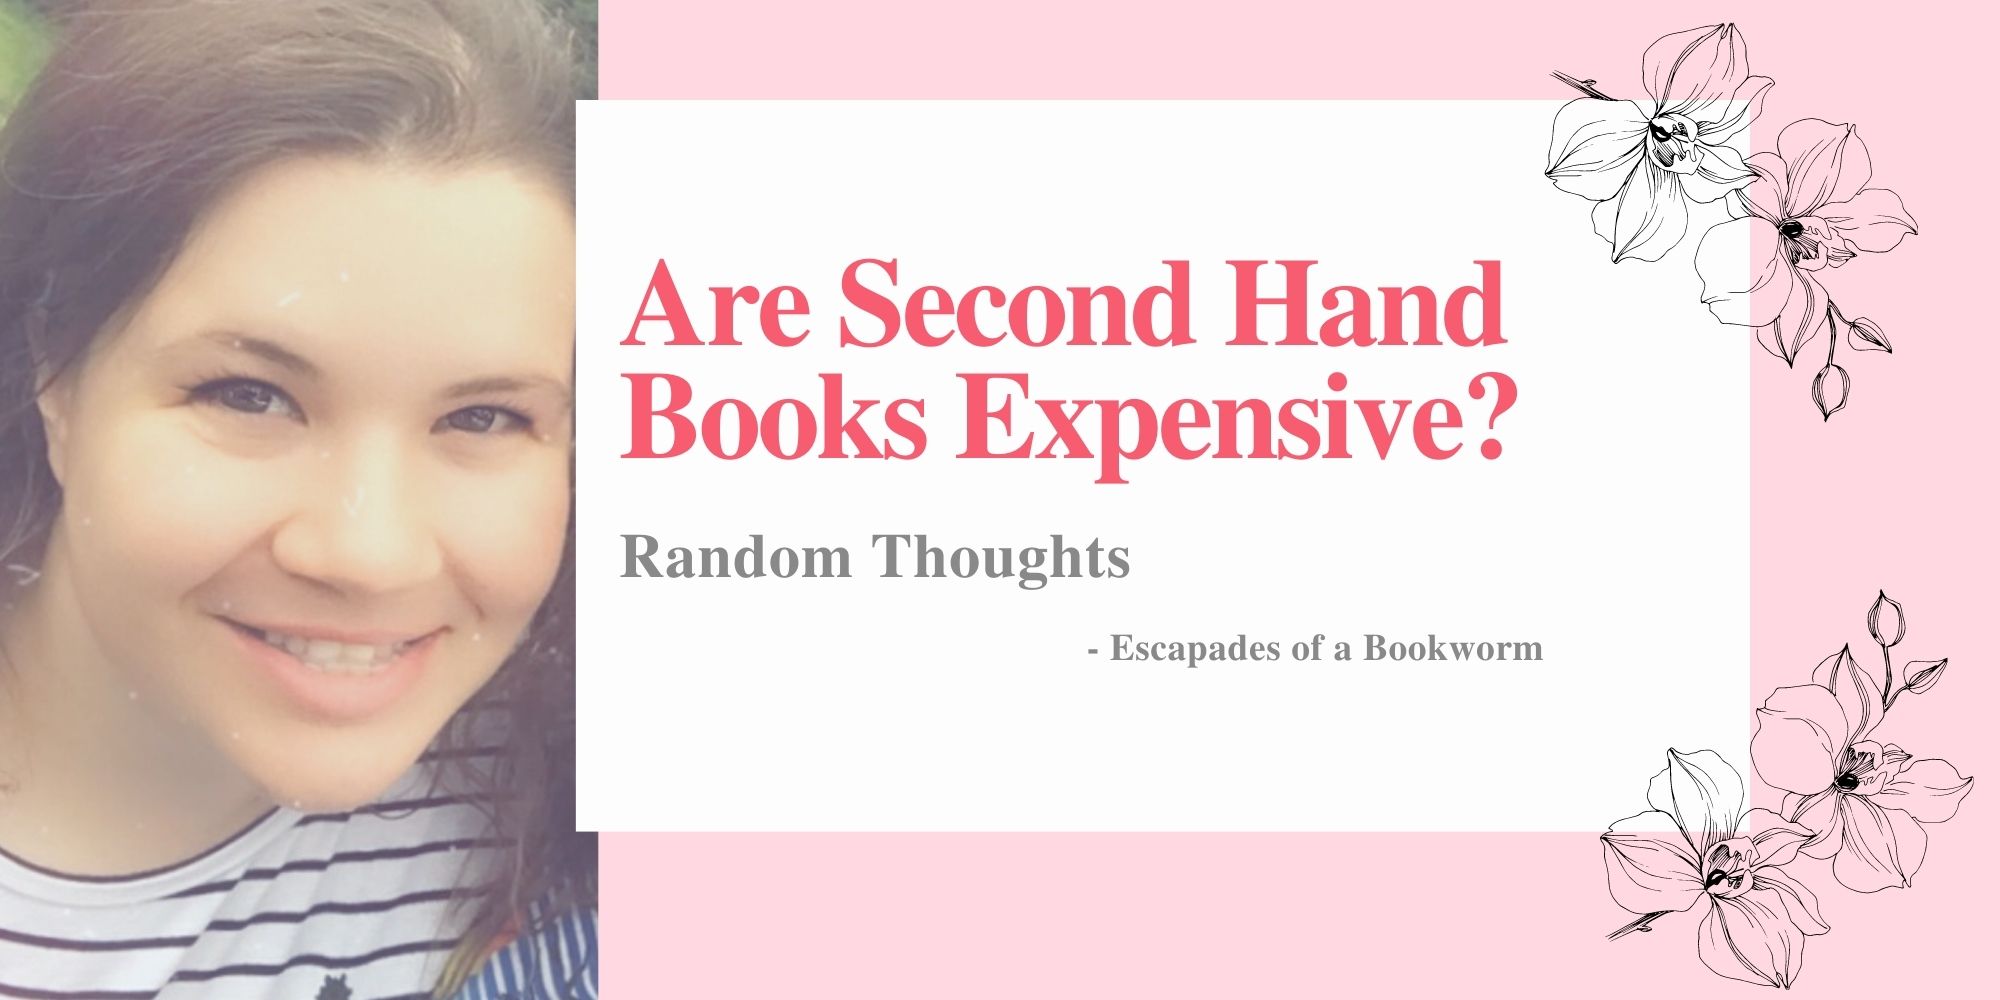 Are Second Hand Books Expensive?